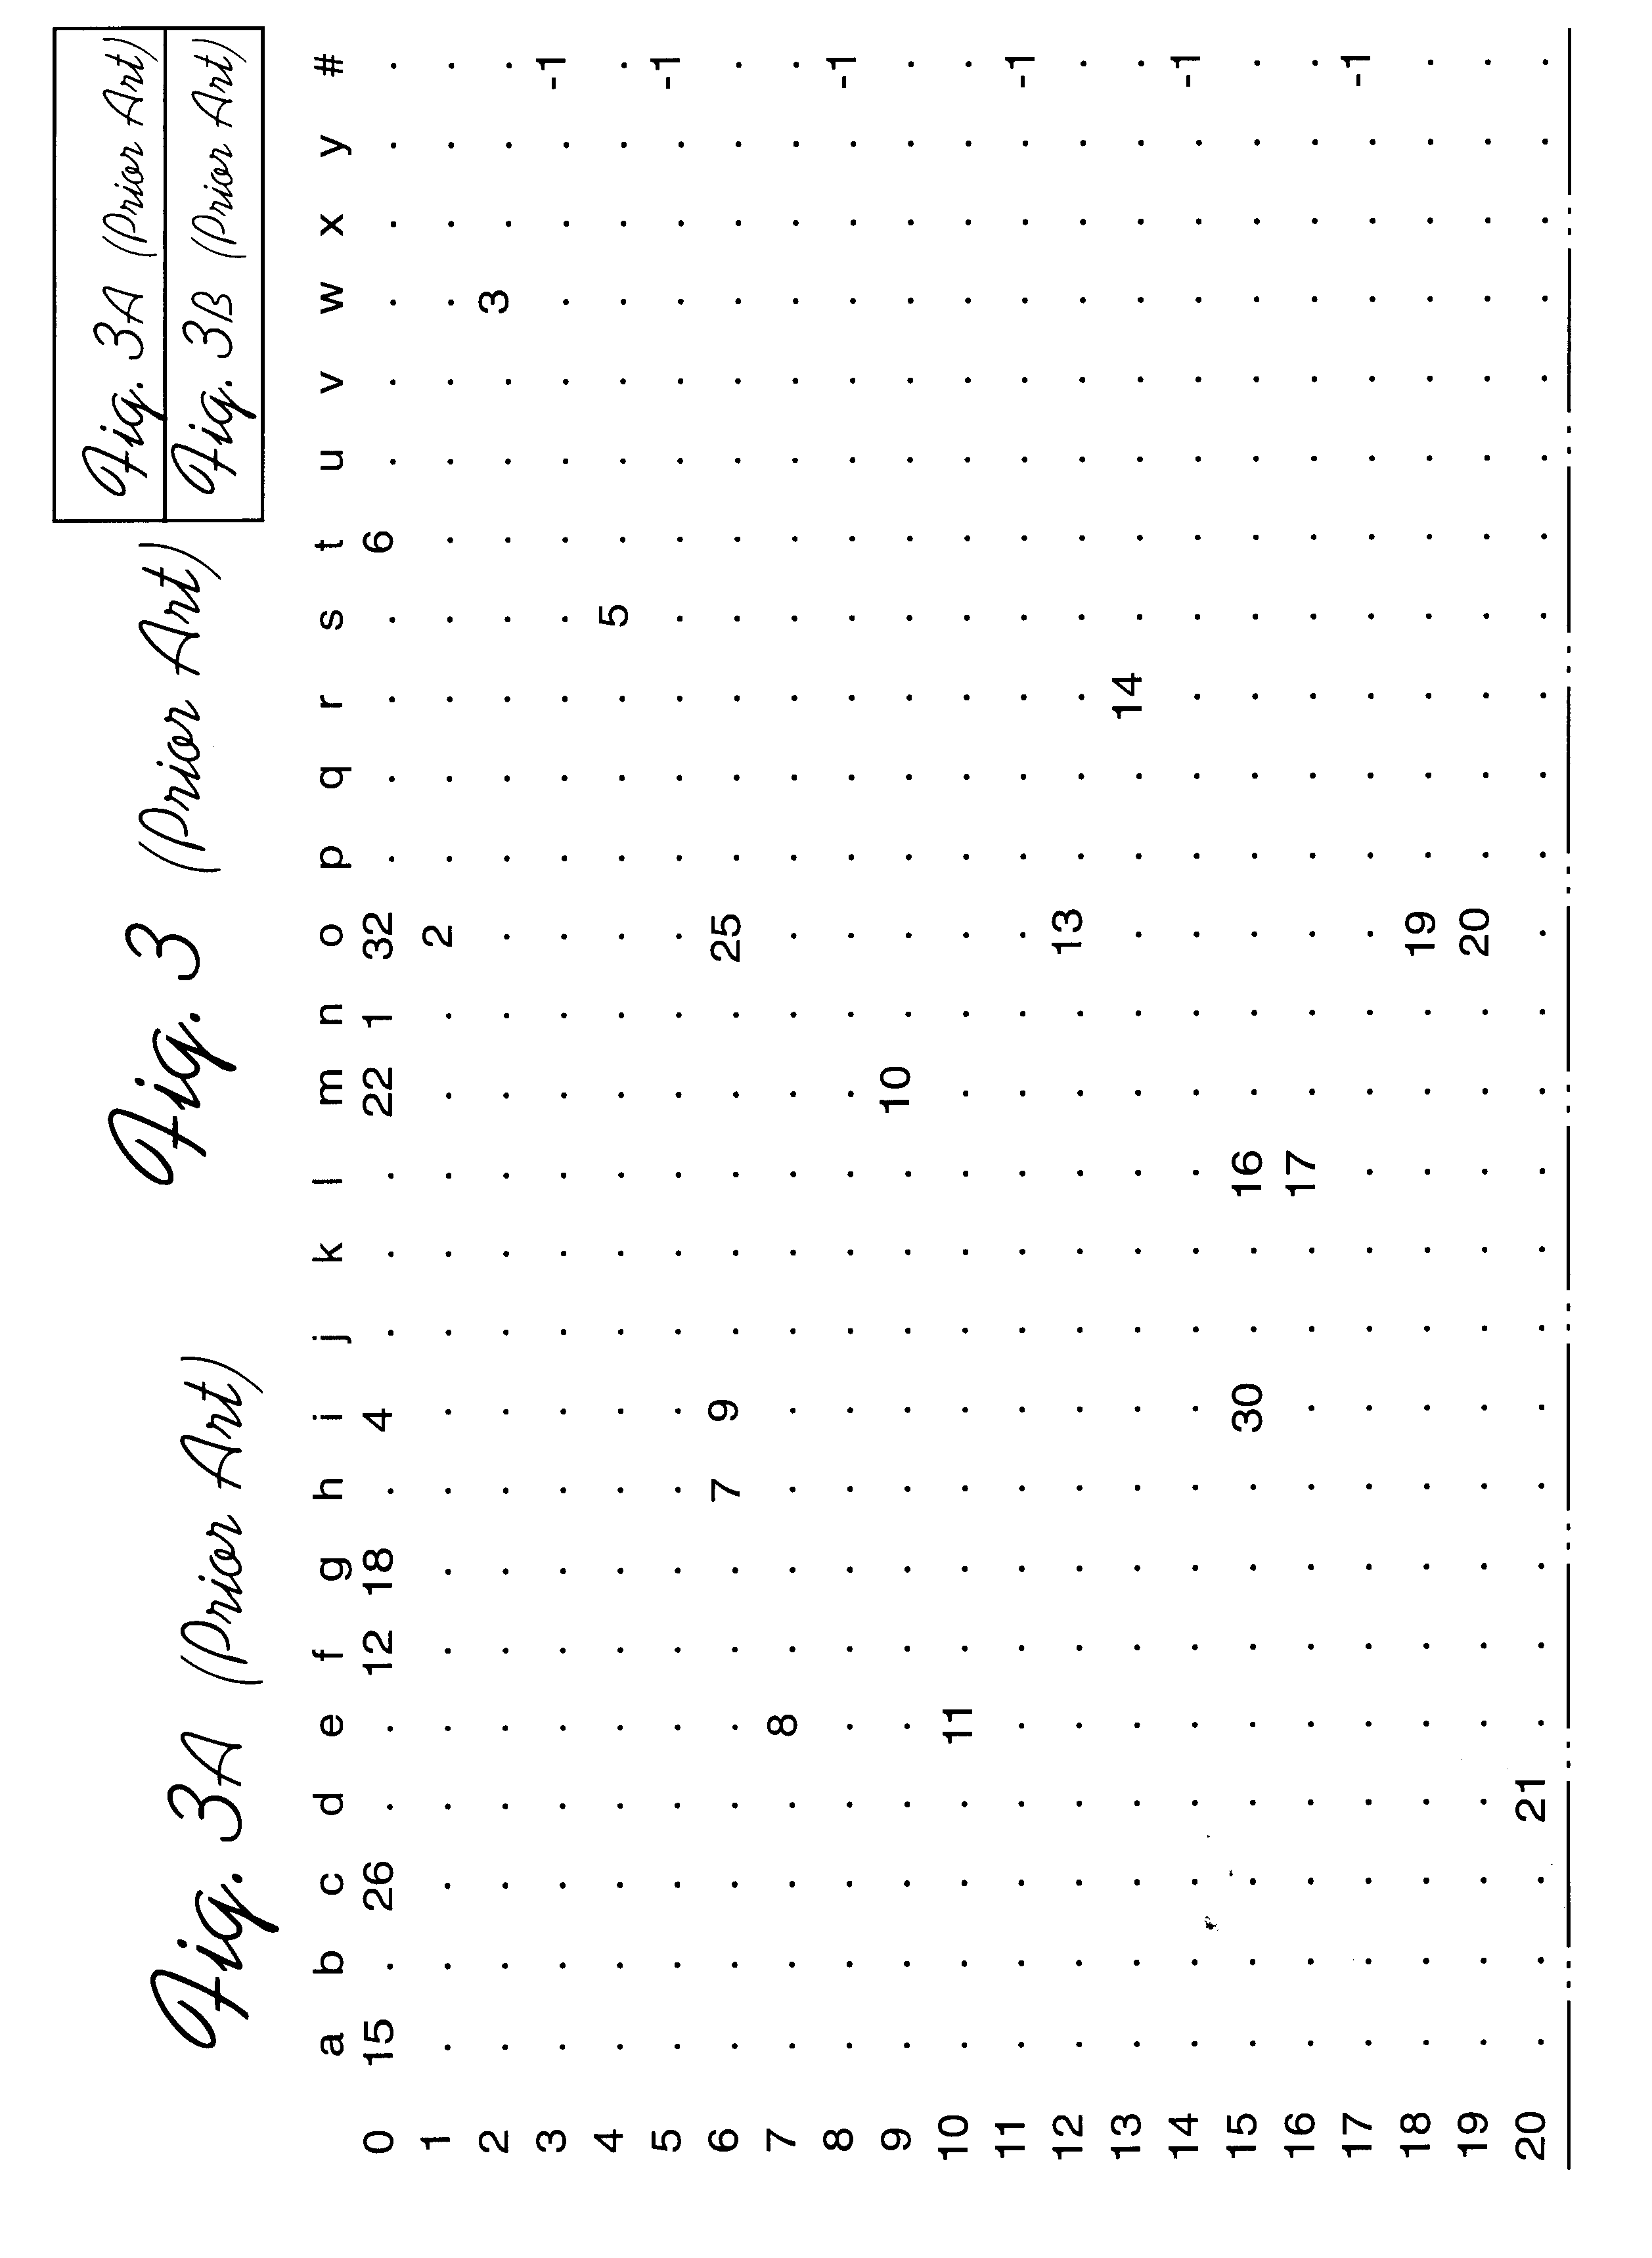 Method, system, program, and data structure for a dense array storing character strings